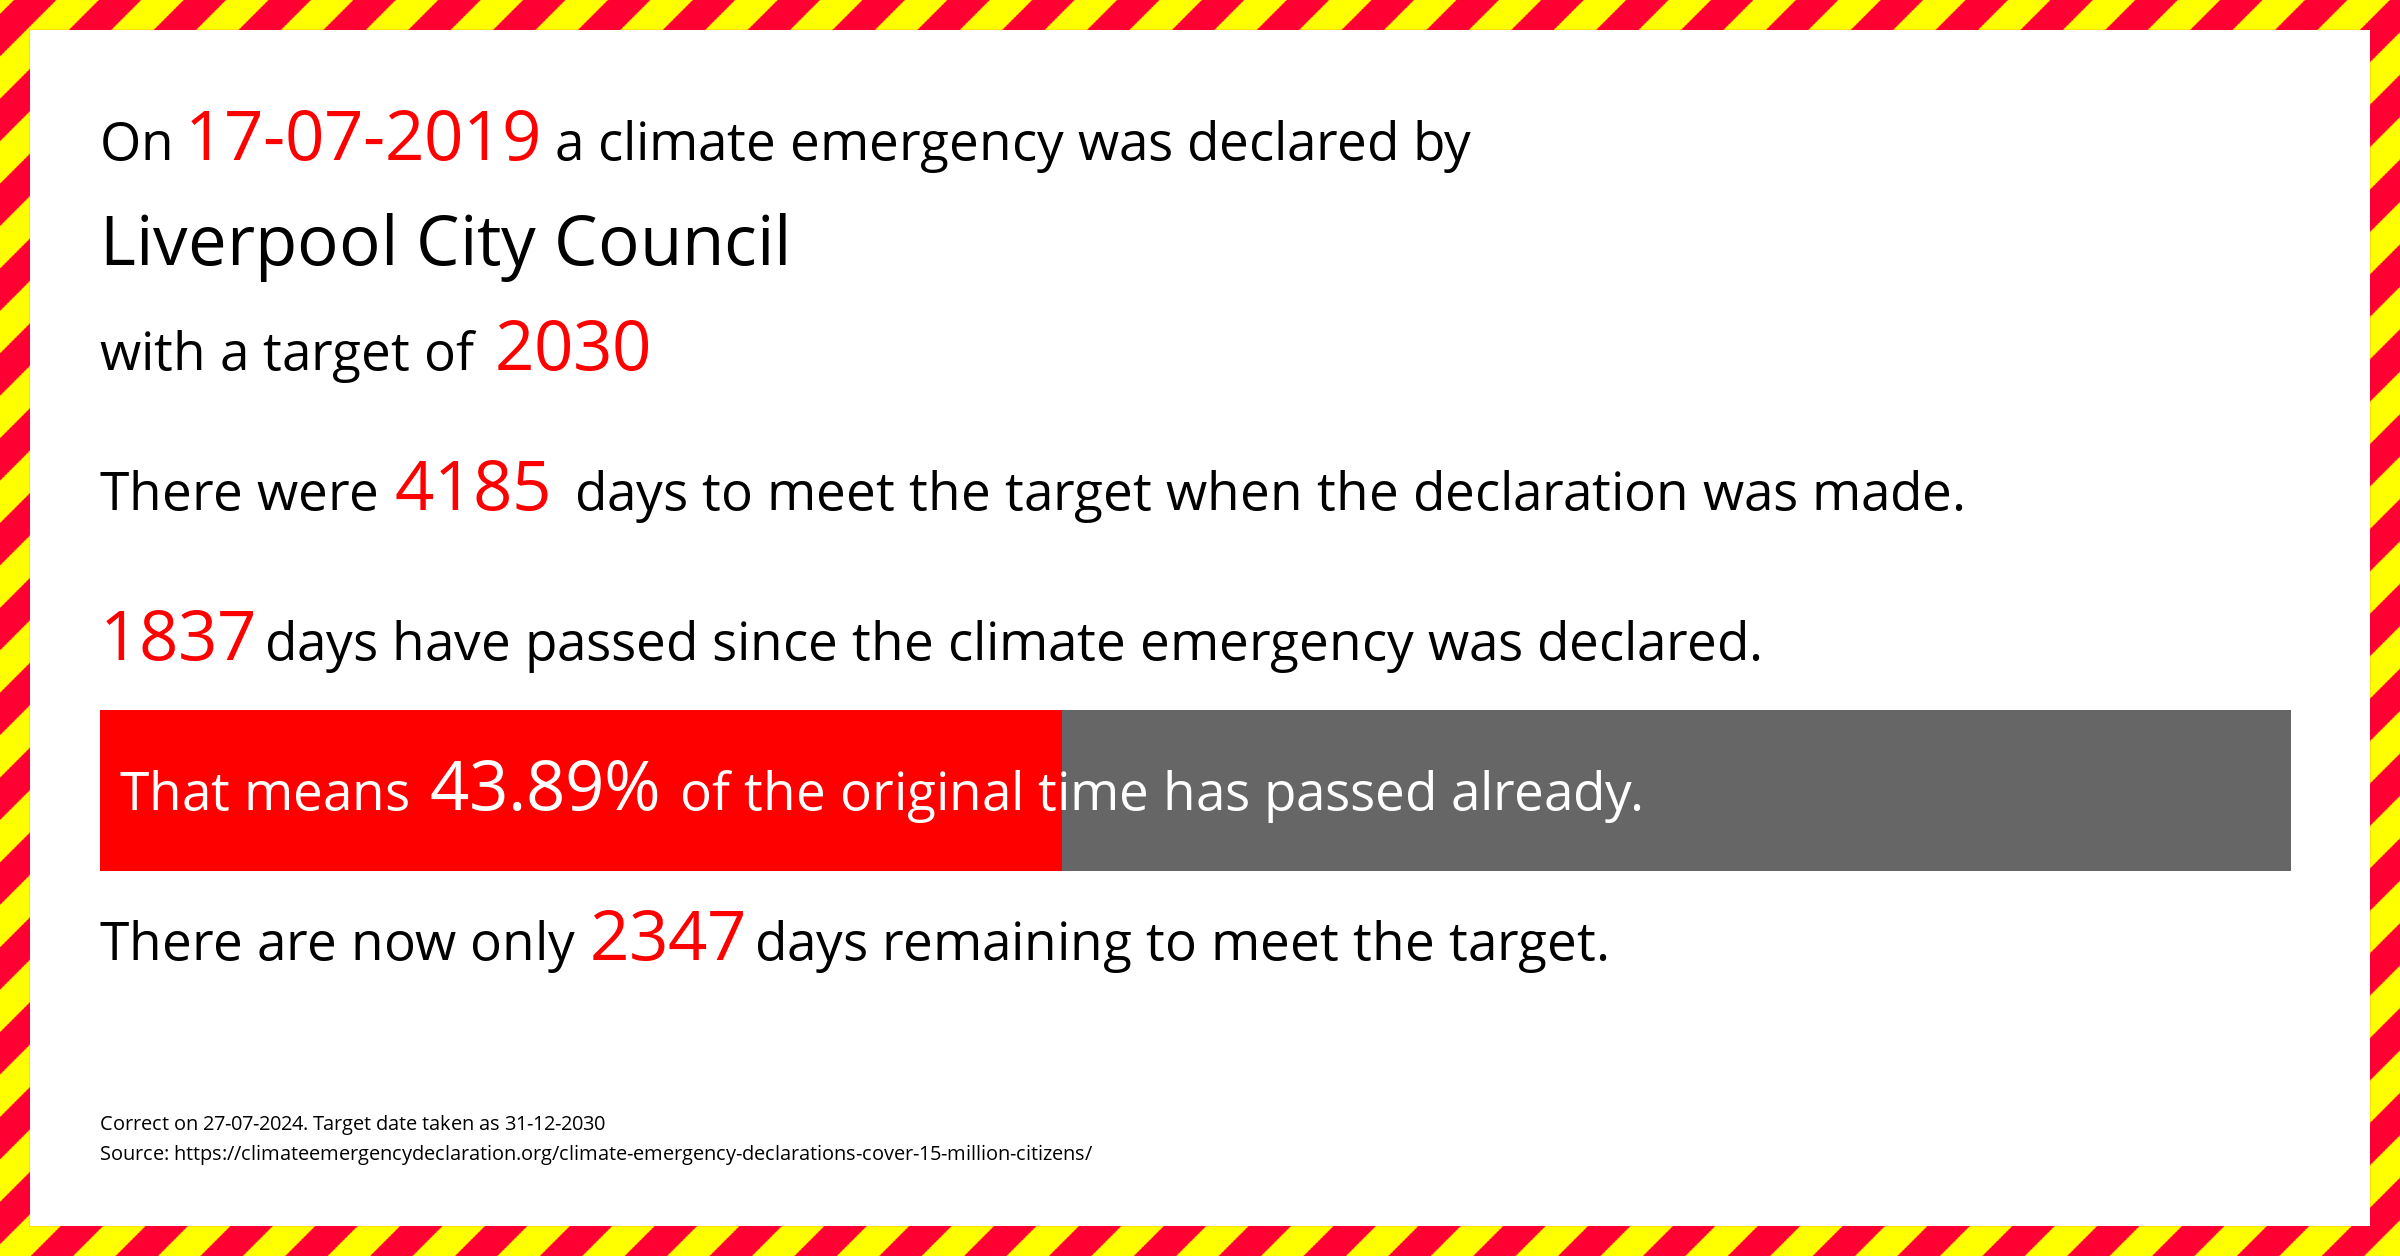 Liverpool City Council declared a Climate emergency on Wednesday 17th July 2019, with a target of 2030.